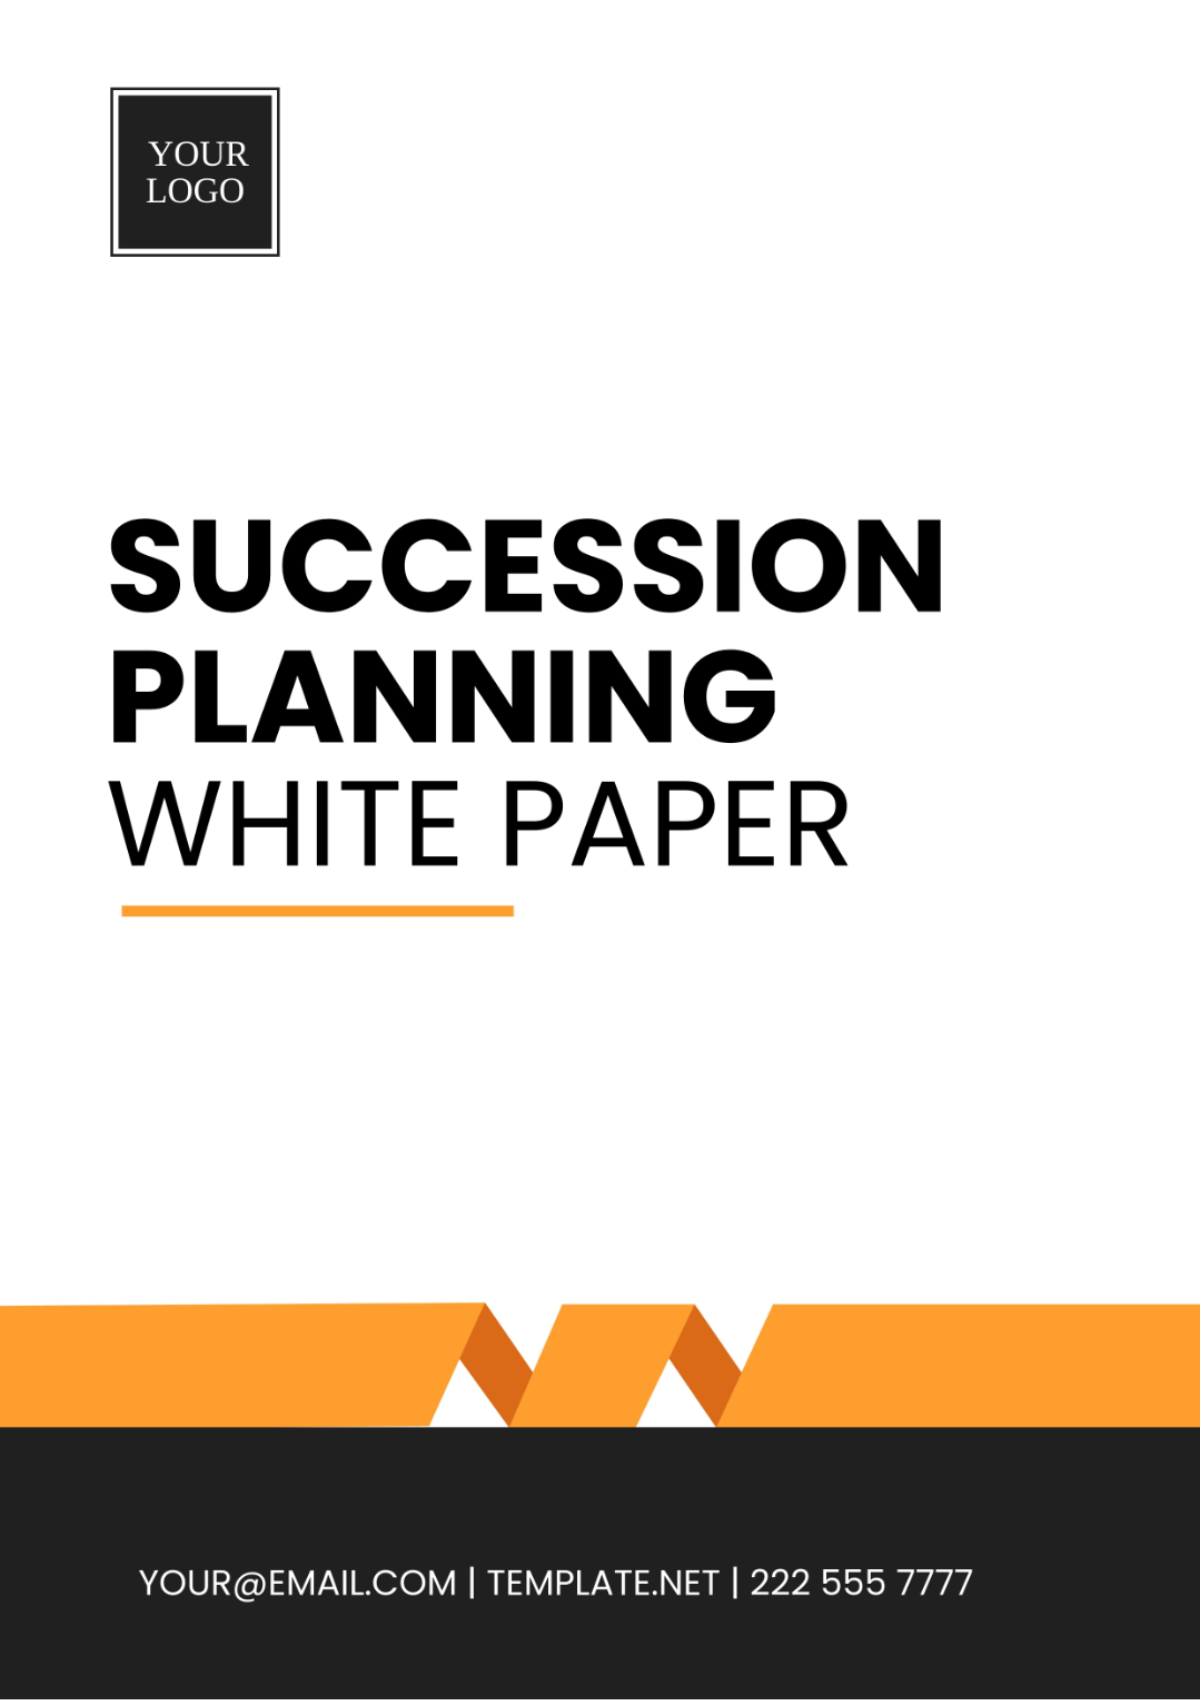 Succession Planning White Paper Template